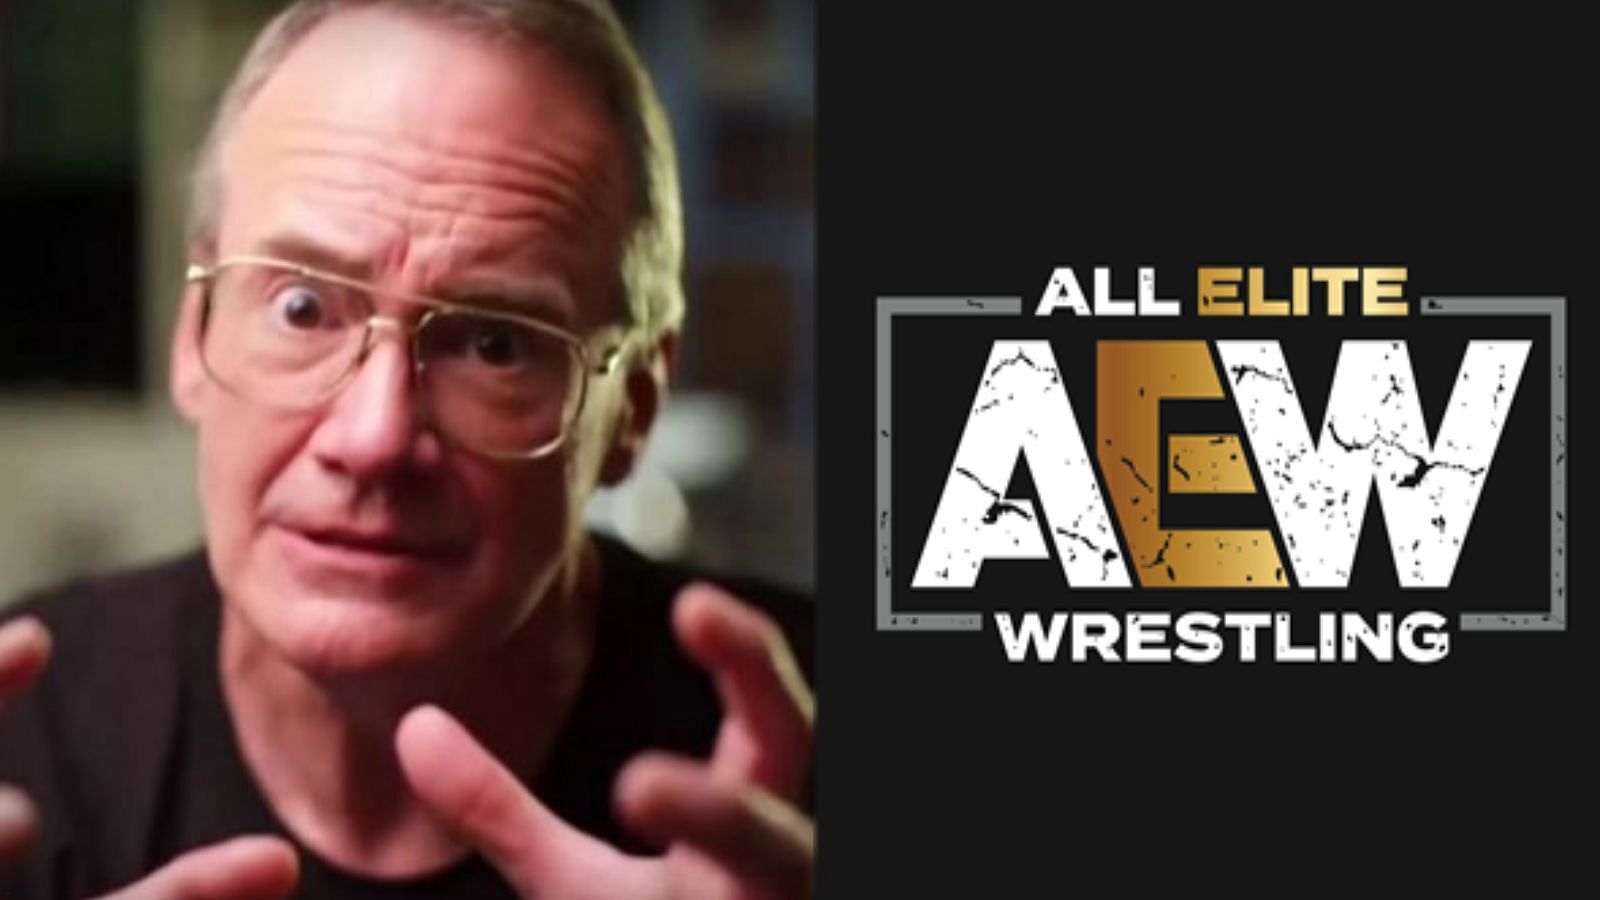 Cornette has never pulled his punches when it comes to All Elite Wrestling.